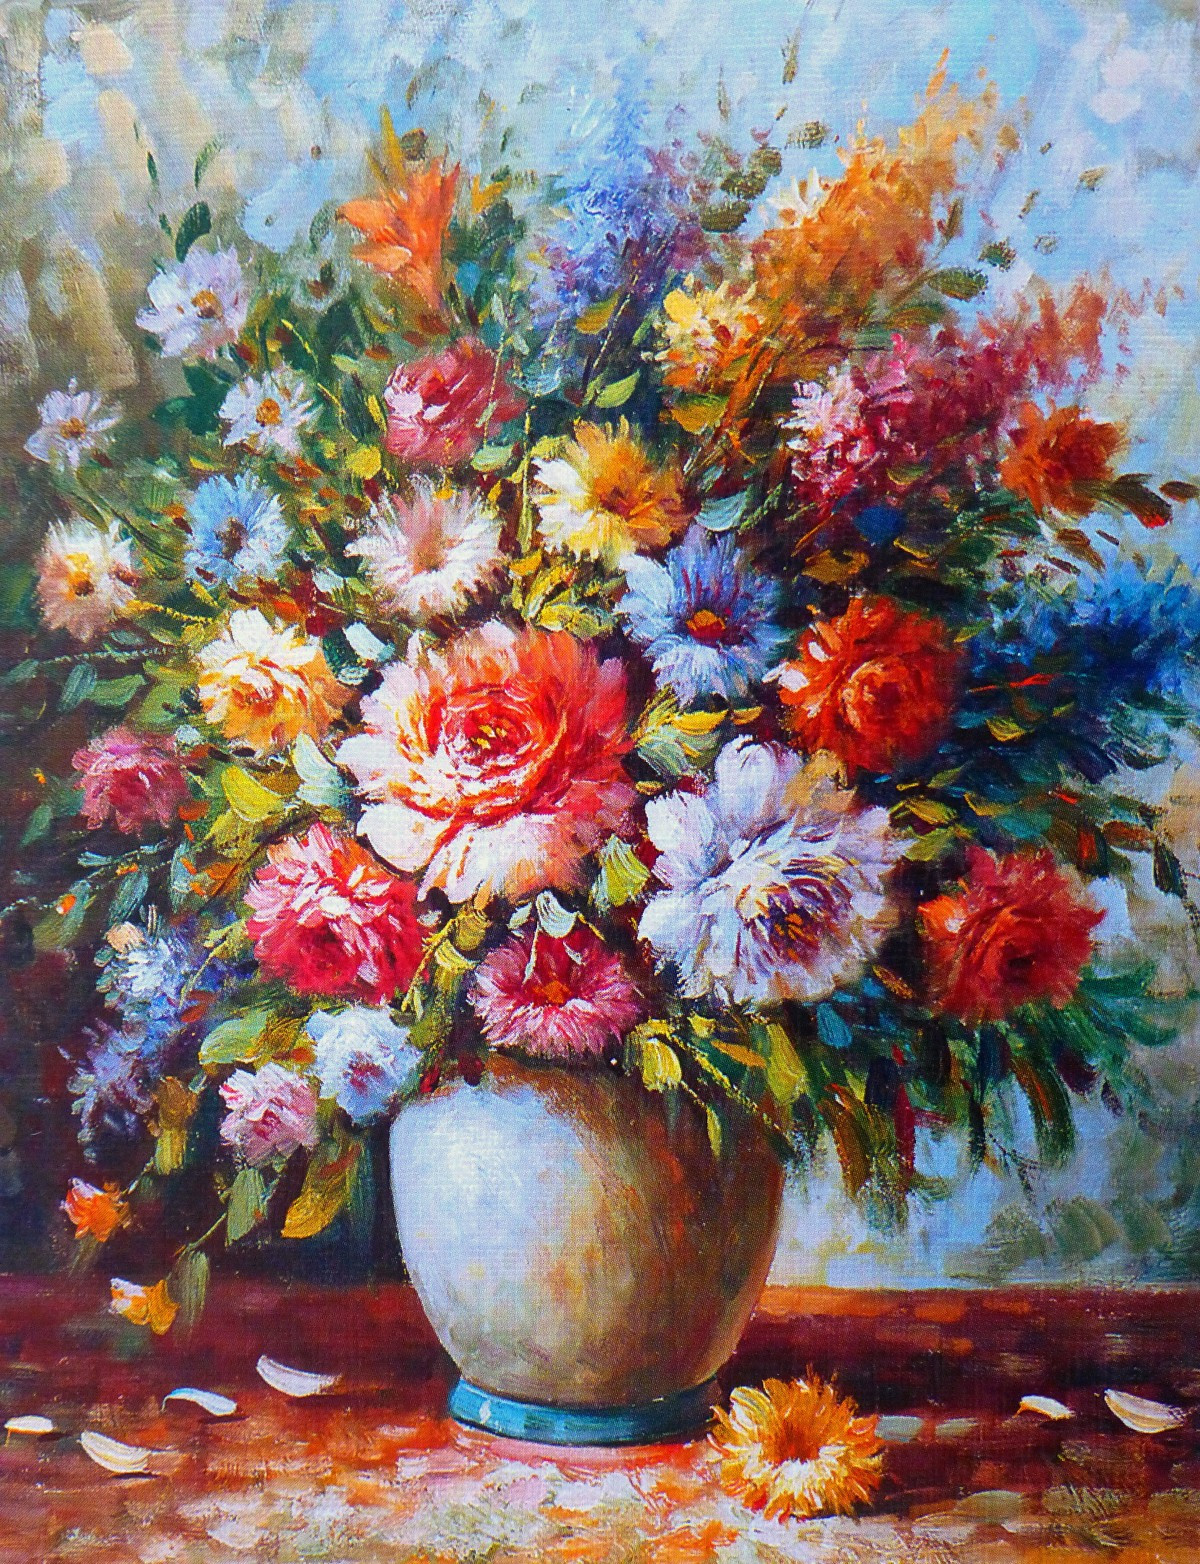 12 Ideal Famous Painting Of Flowers In A Vase 2024 free download famous painting of flowers in a vase of free images purple vase flora still life artwork art picture intended for plant flower bouquet vase colorful still life